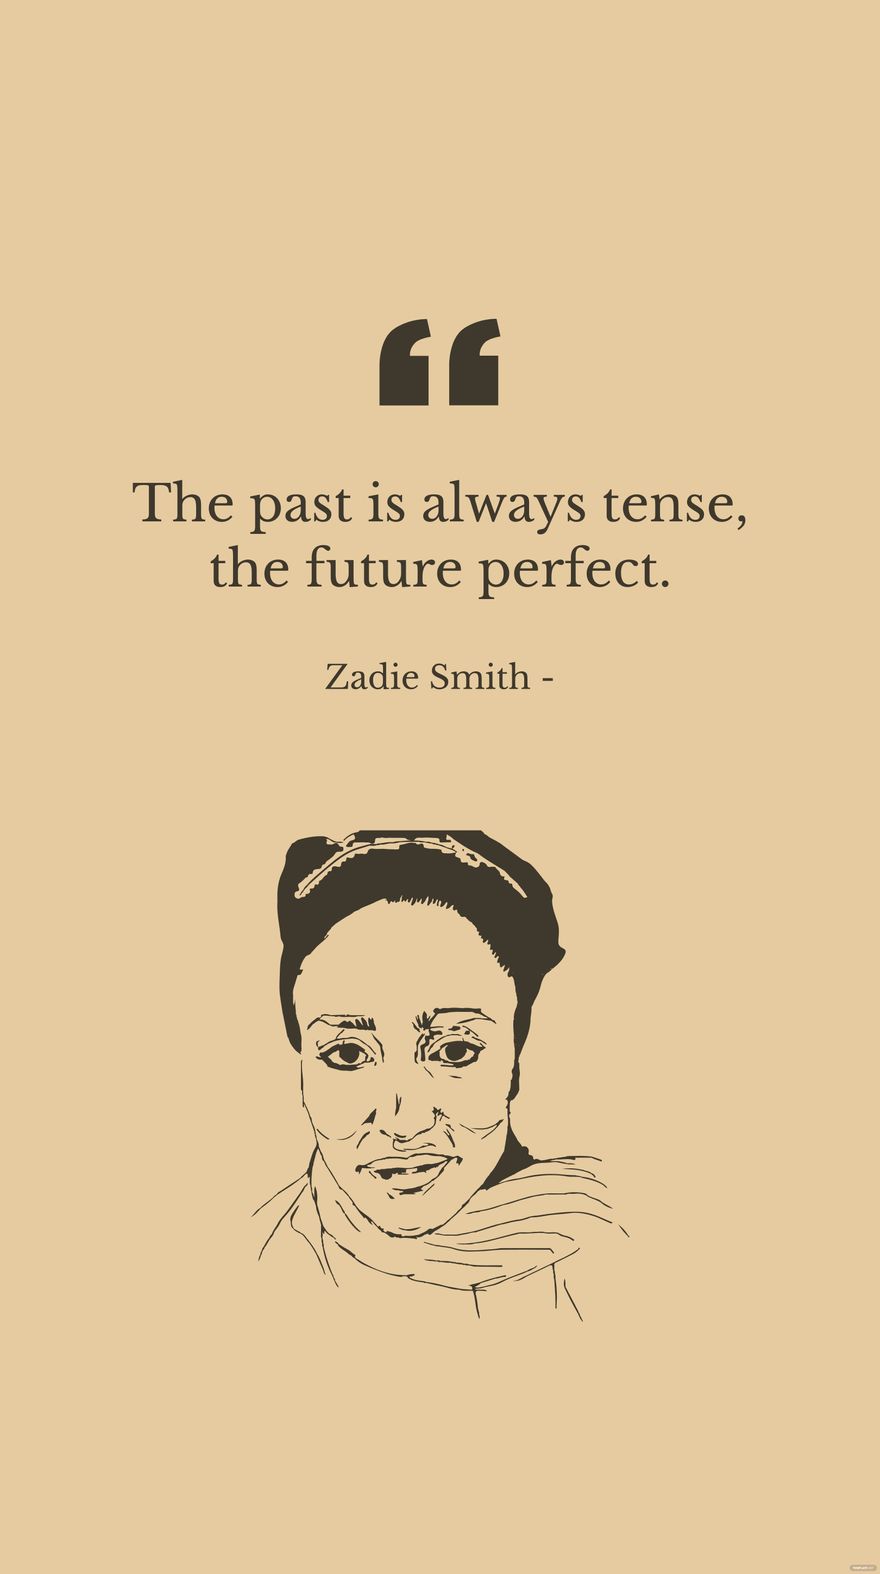 Zadie Smith - The past is always tense, the future perfect.